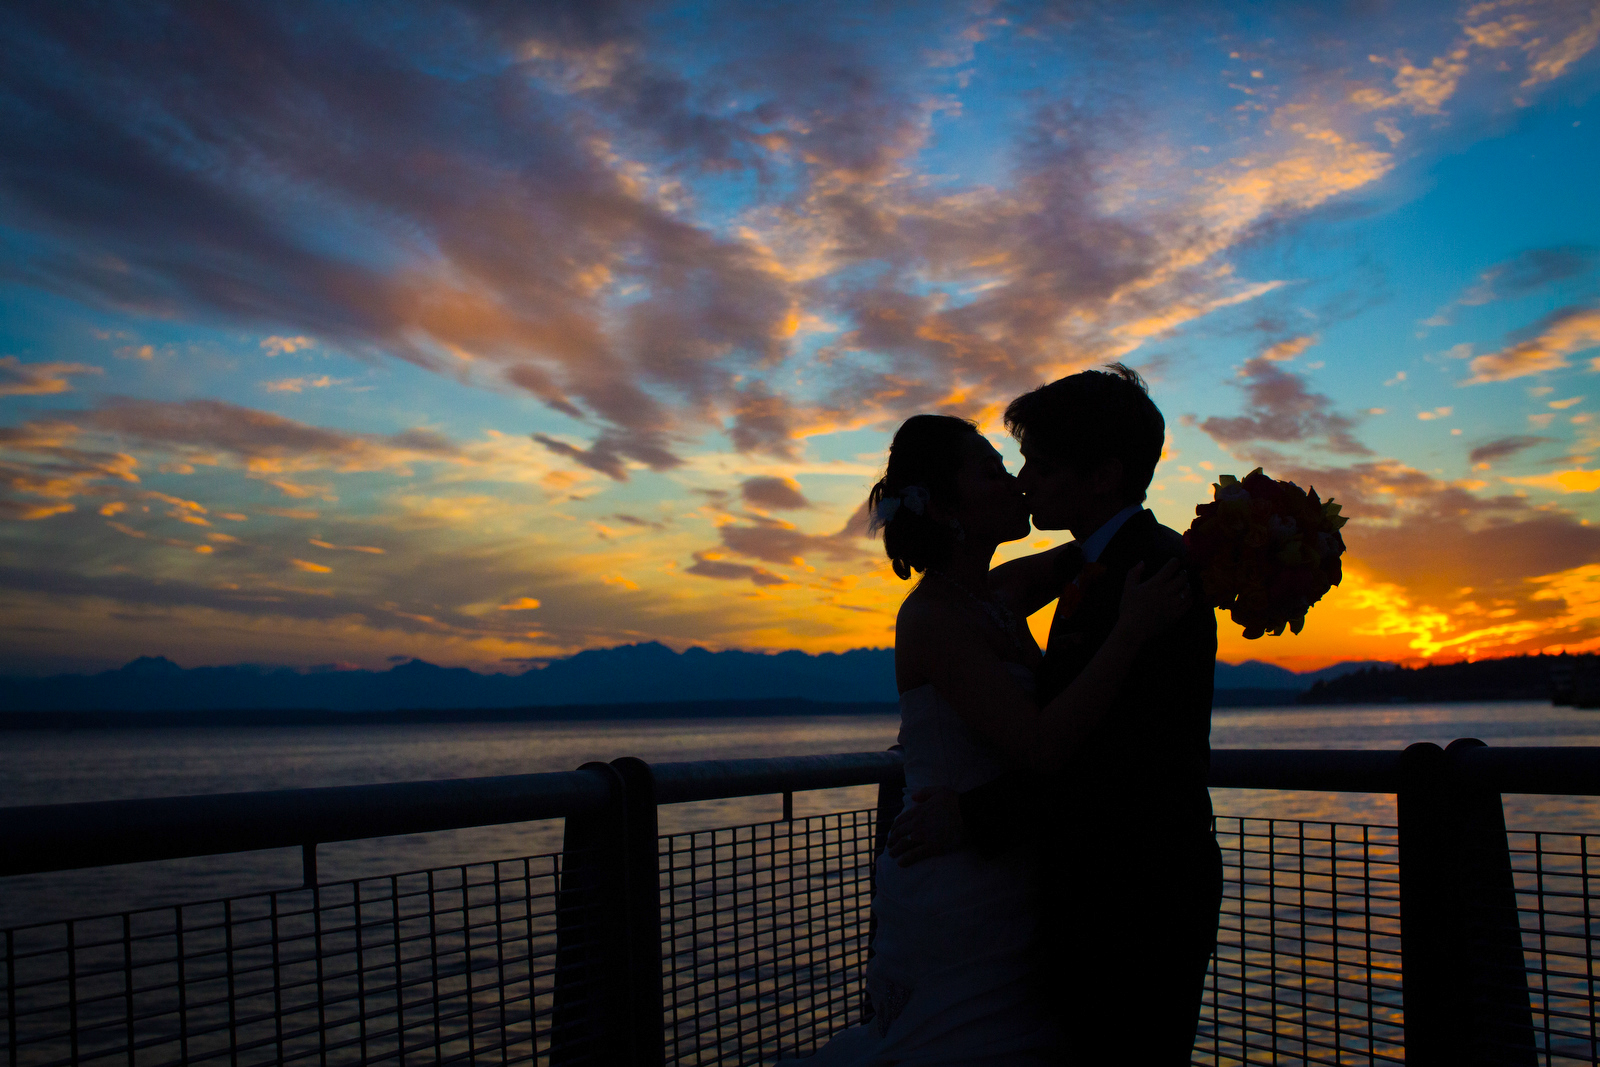 The bride & groom are silhouetted as they kiss in front of a beautiful sunset on the Seattle waterfront during their wedding at the Seattle Aquarium. (Wedding Photography by Scott Eklund - Red Box Pictures)